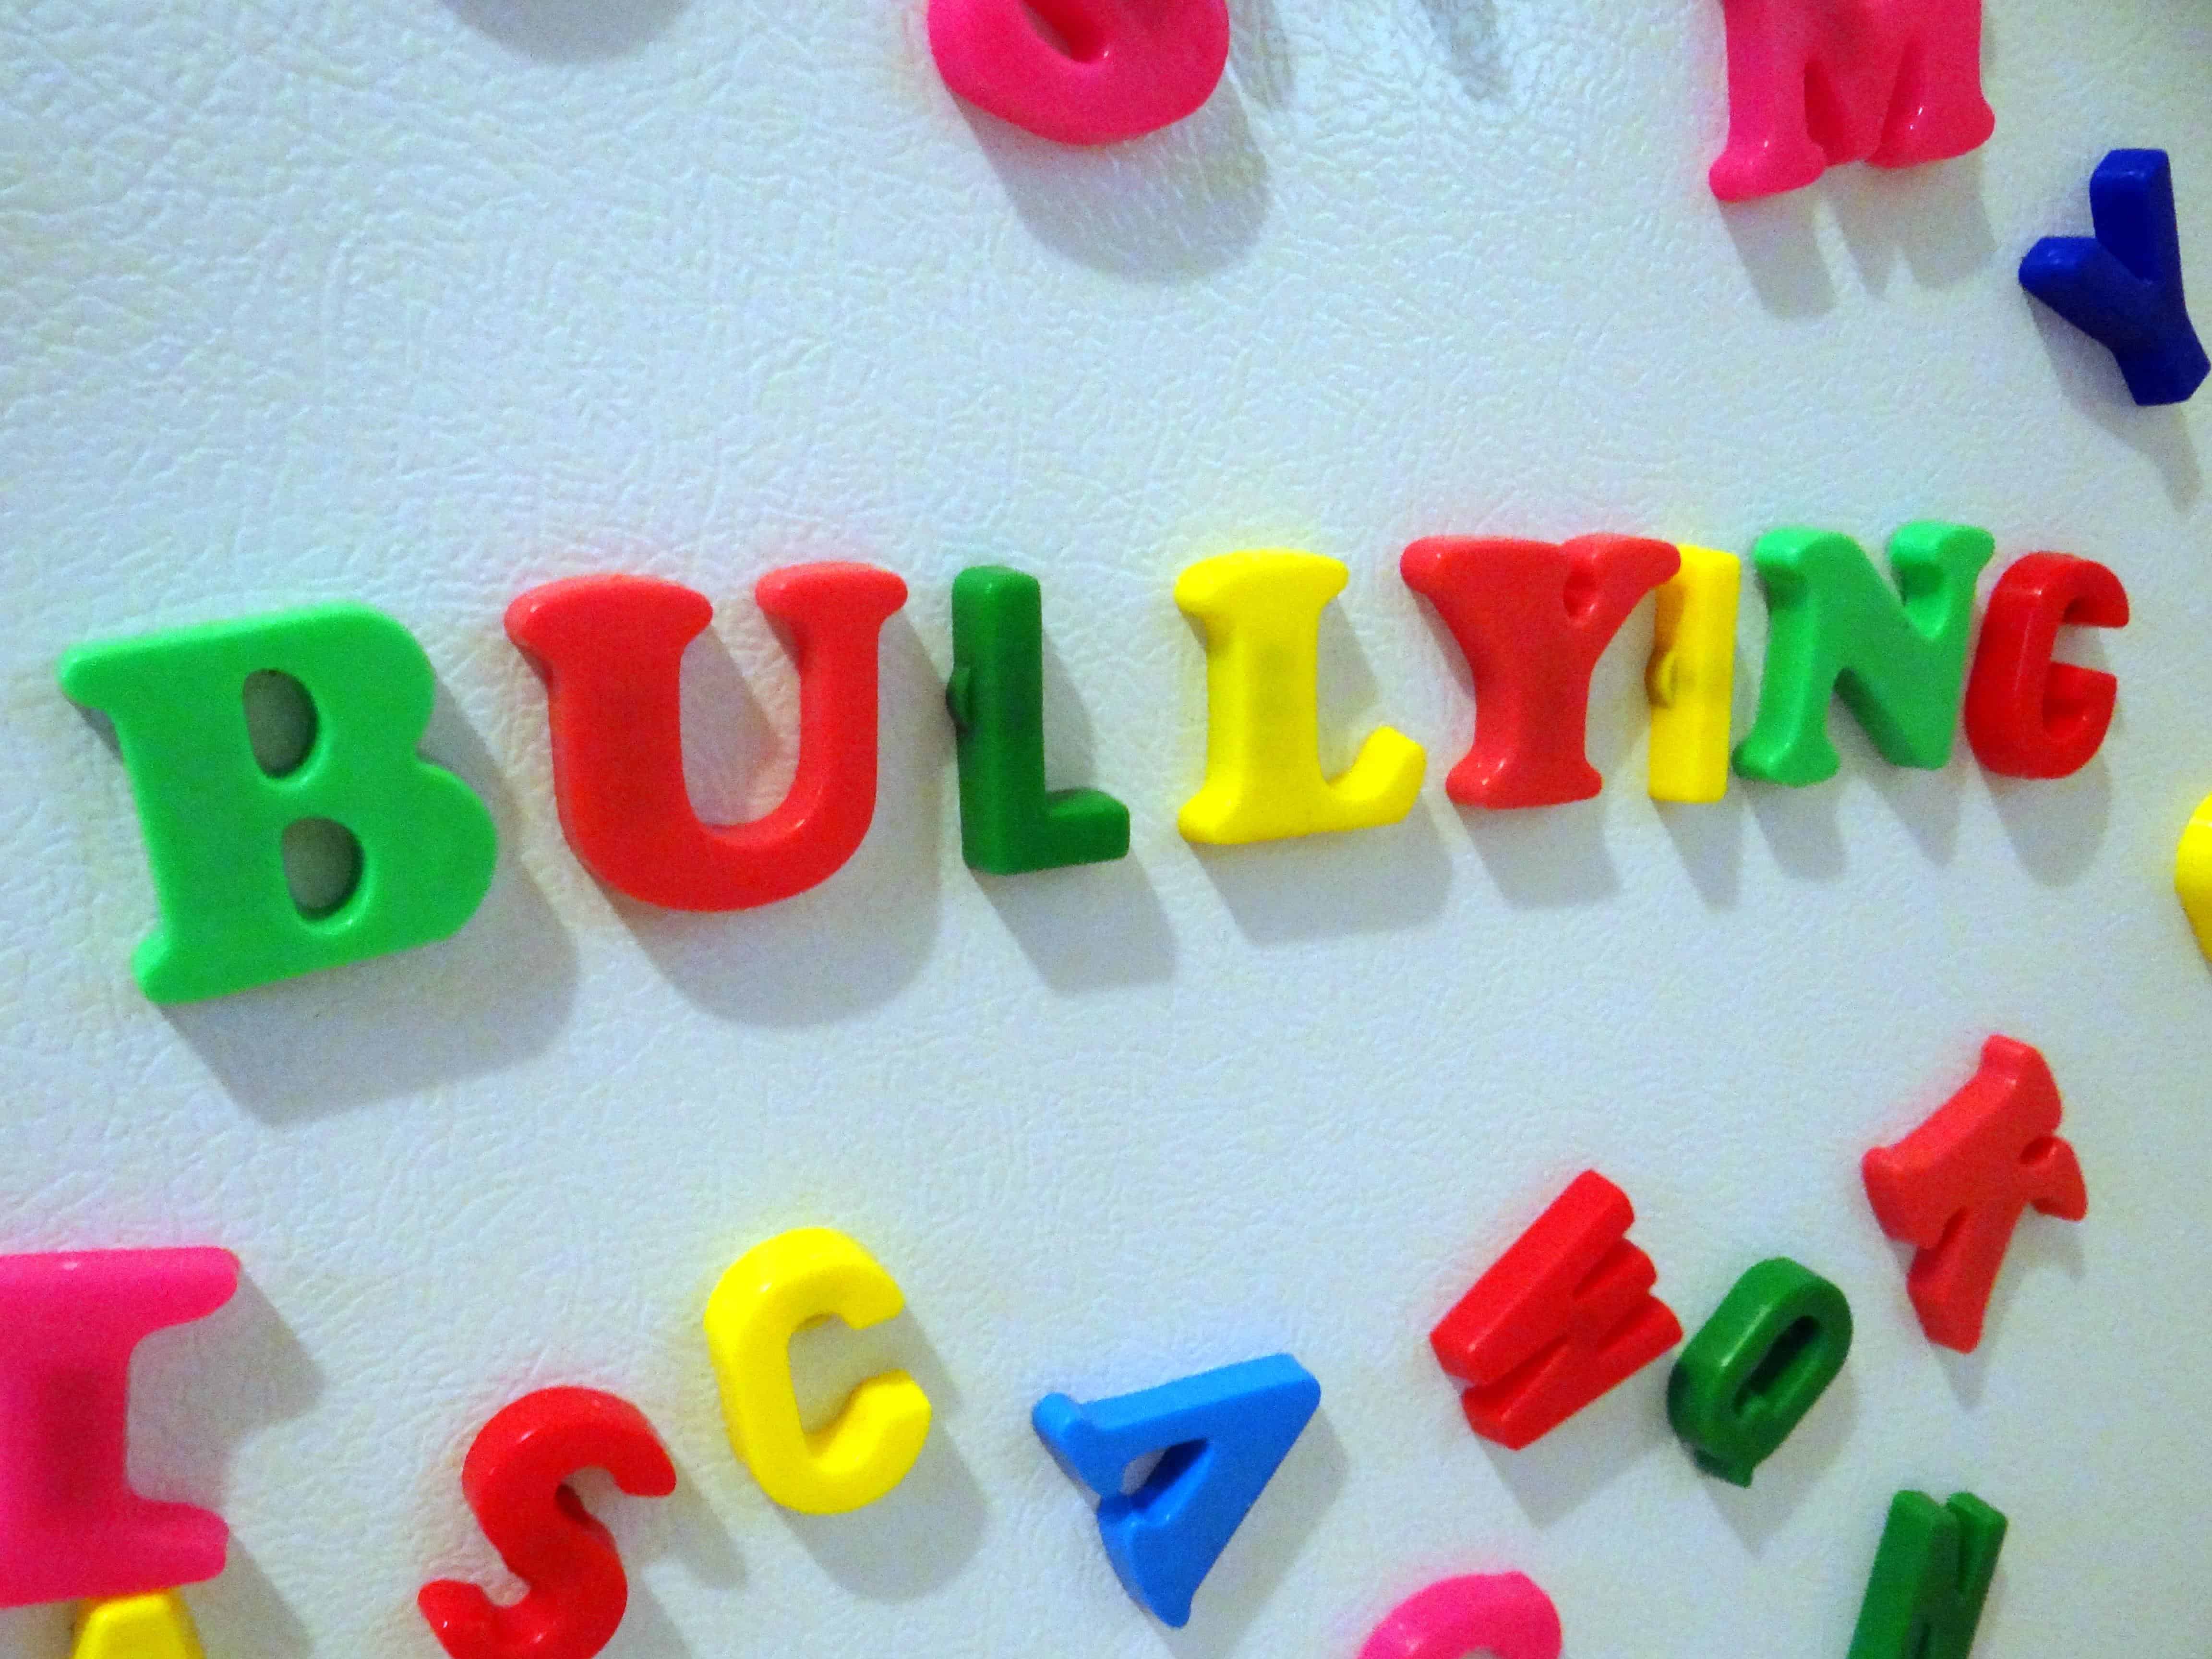 How do we stop bullying?